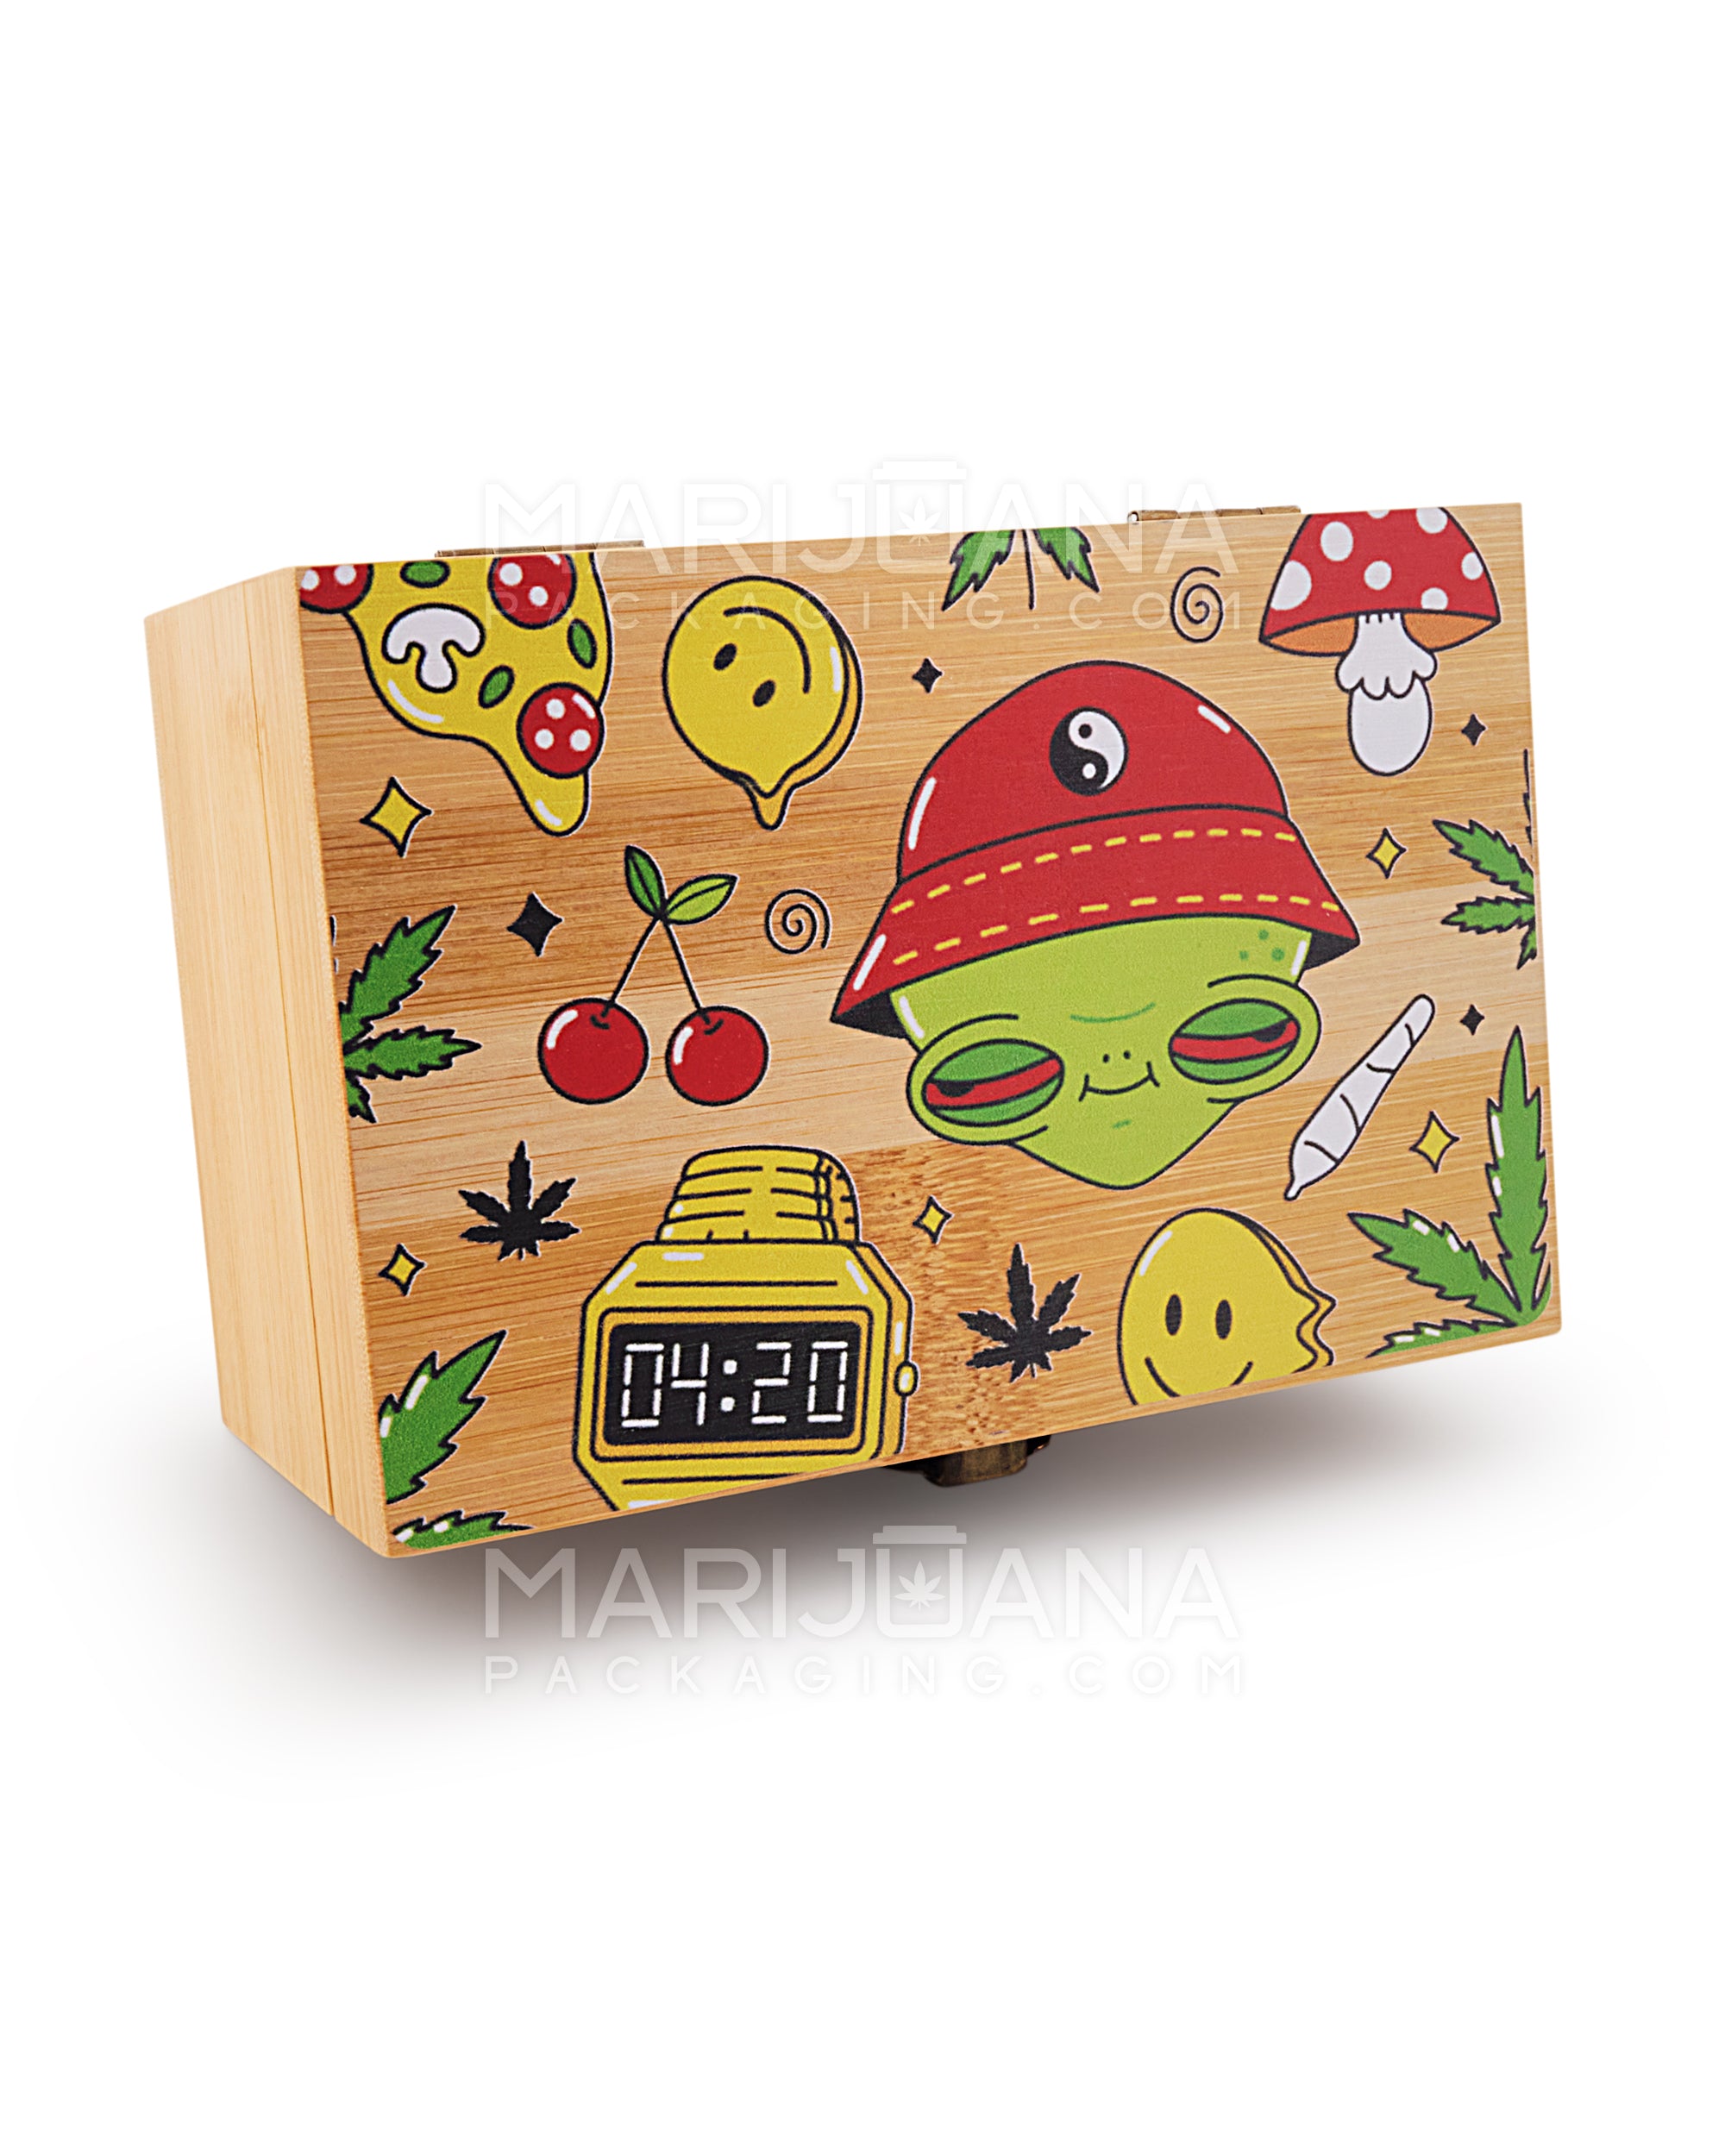 Lifted Alien Collage Wooden Latch Lock Stash Box w/ Accessories | 152mm - Wood - 2